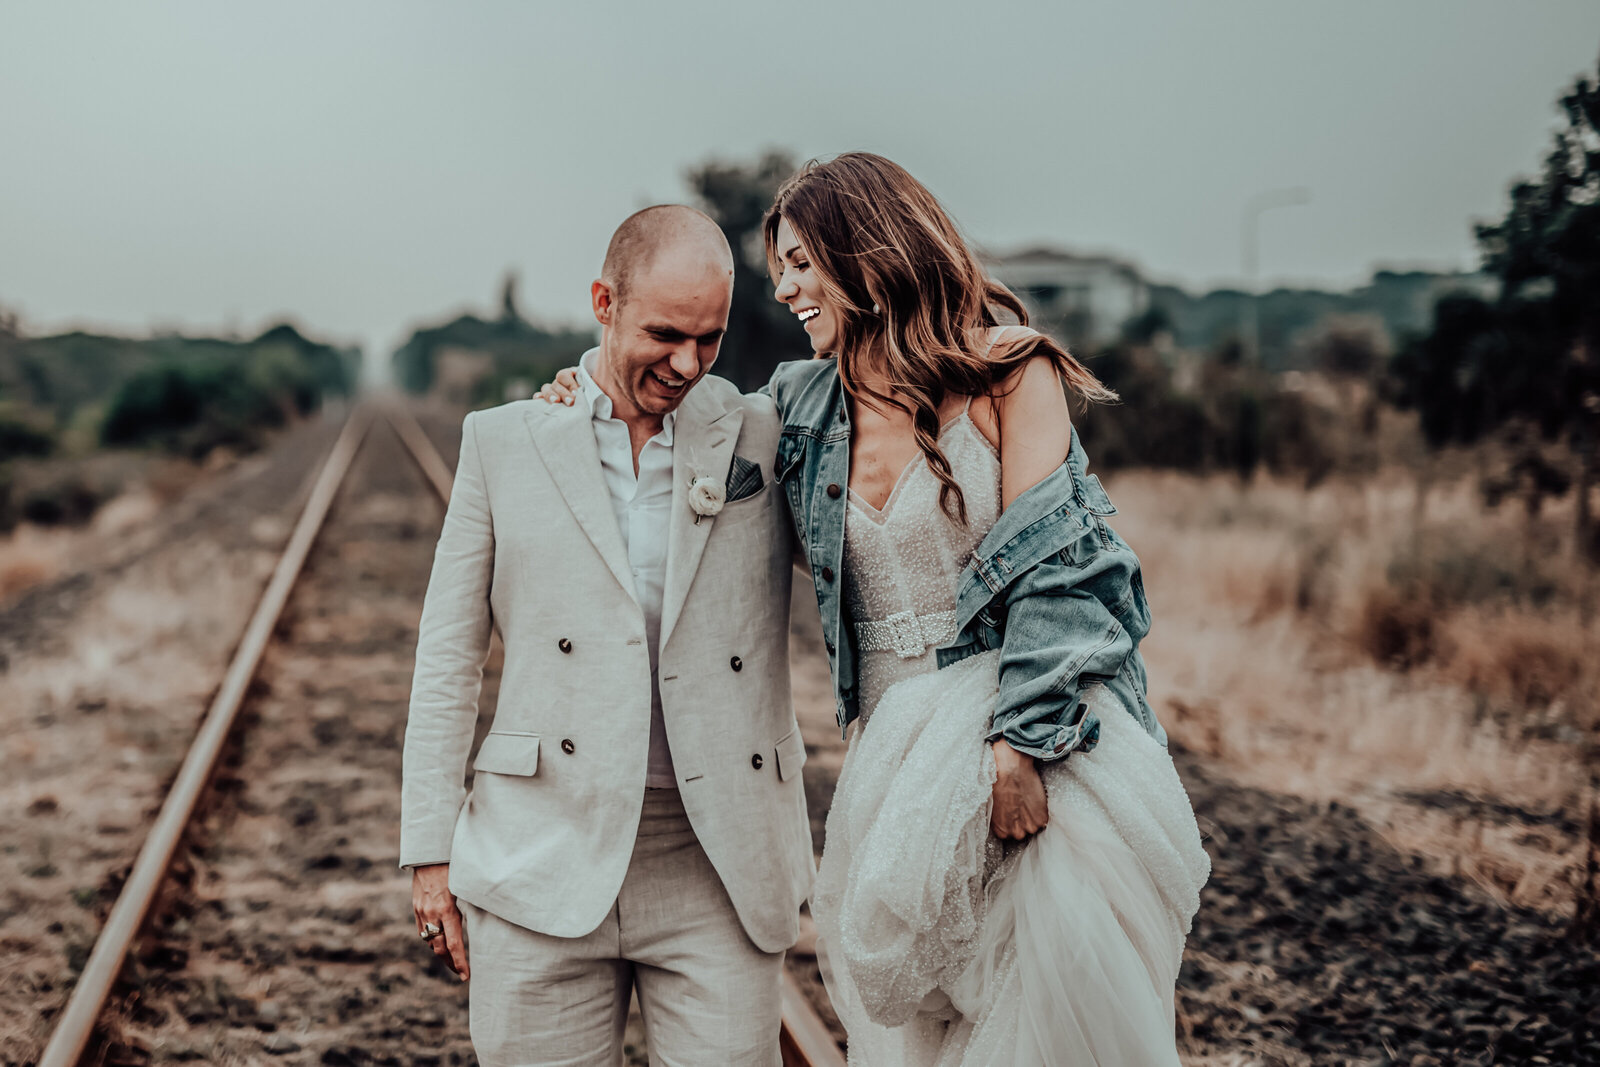 Newlywed couple's railway track pose with a soft-focus backdrop